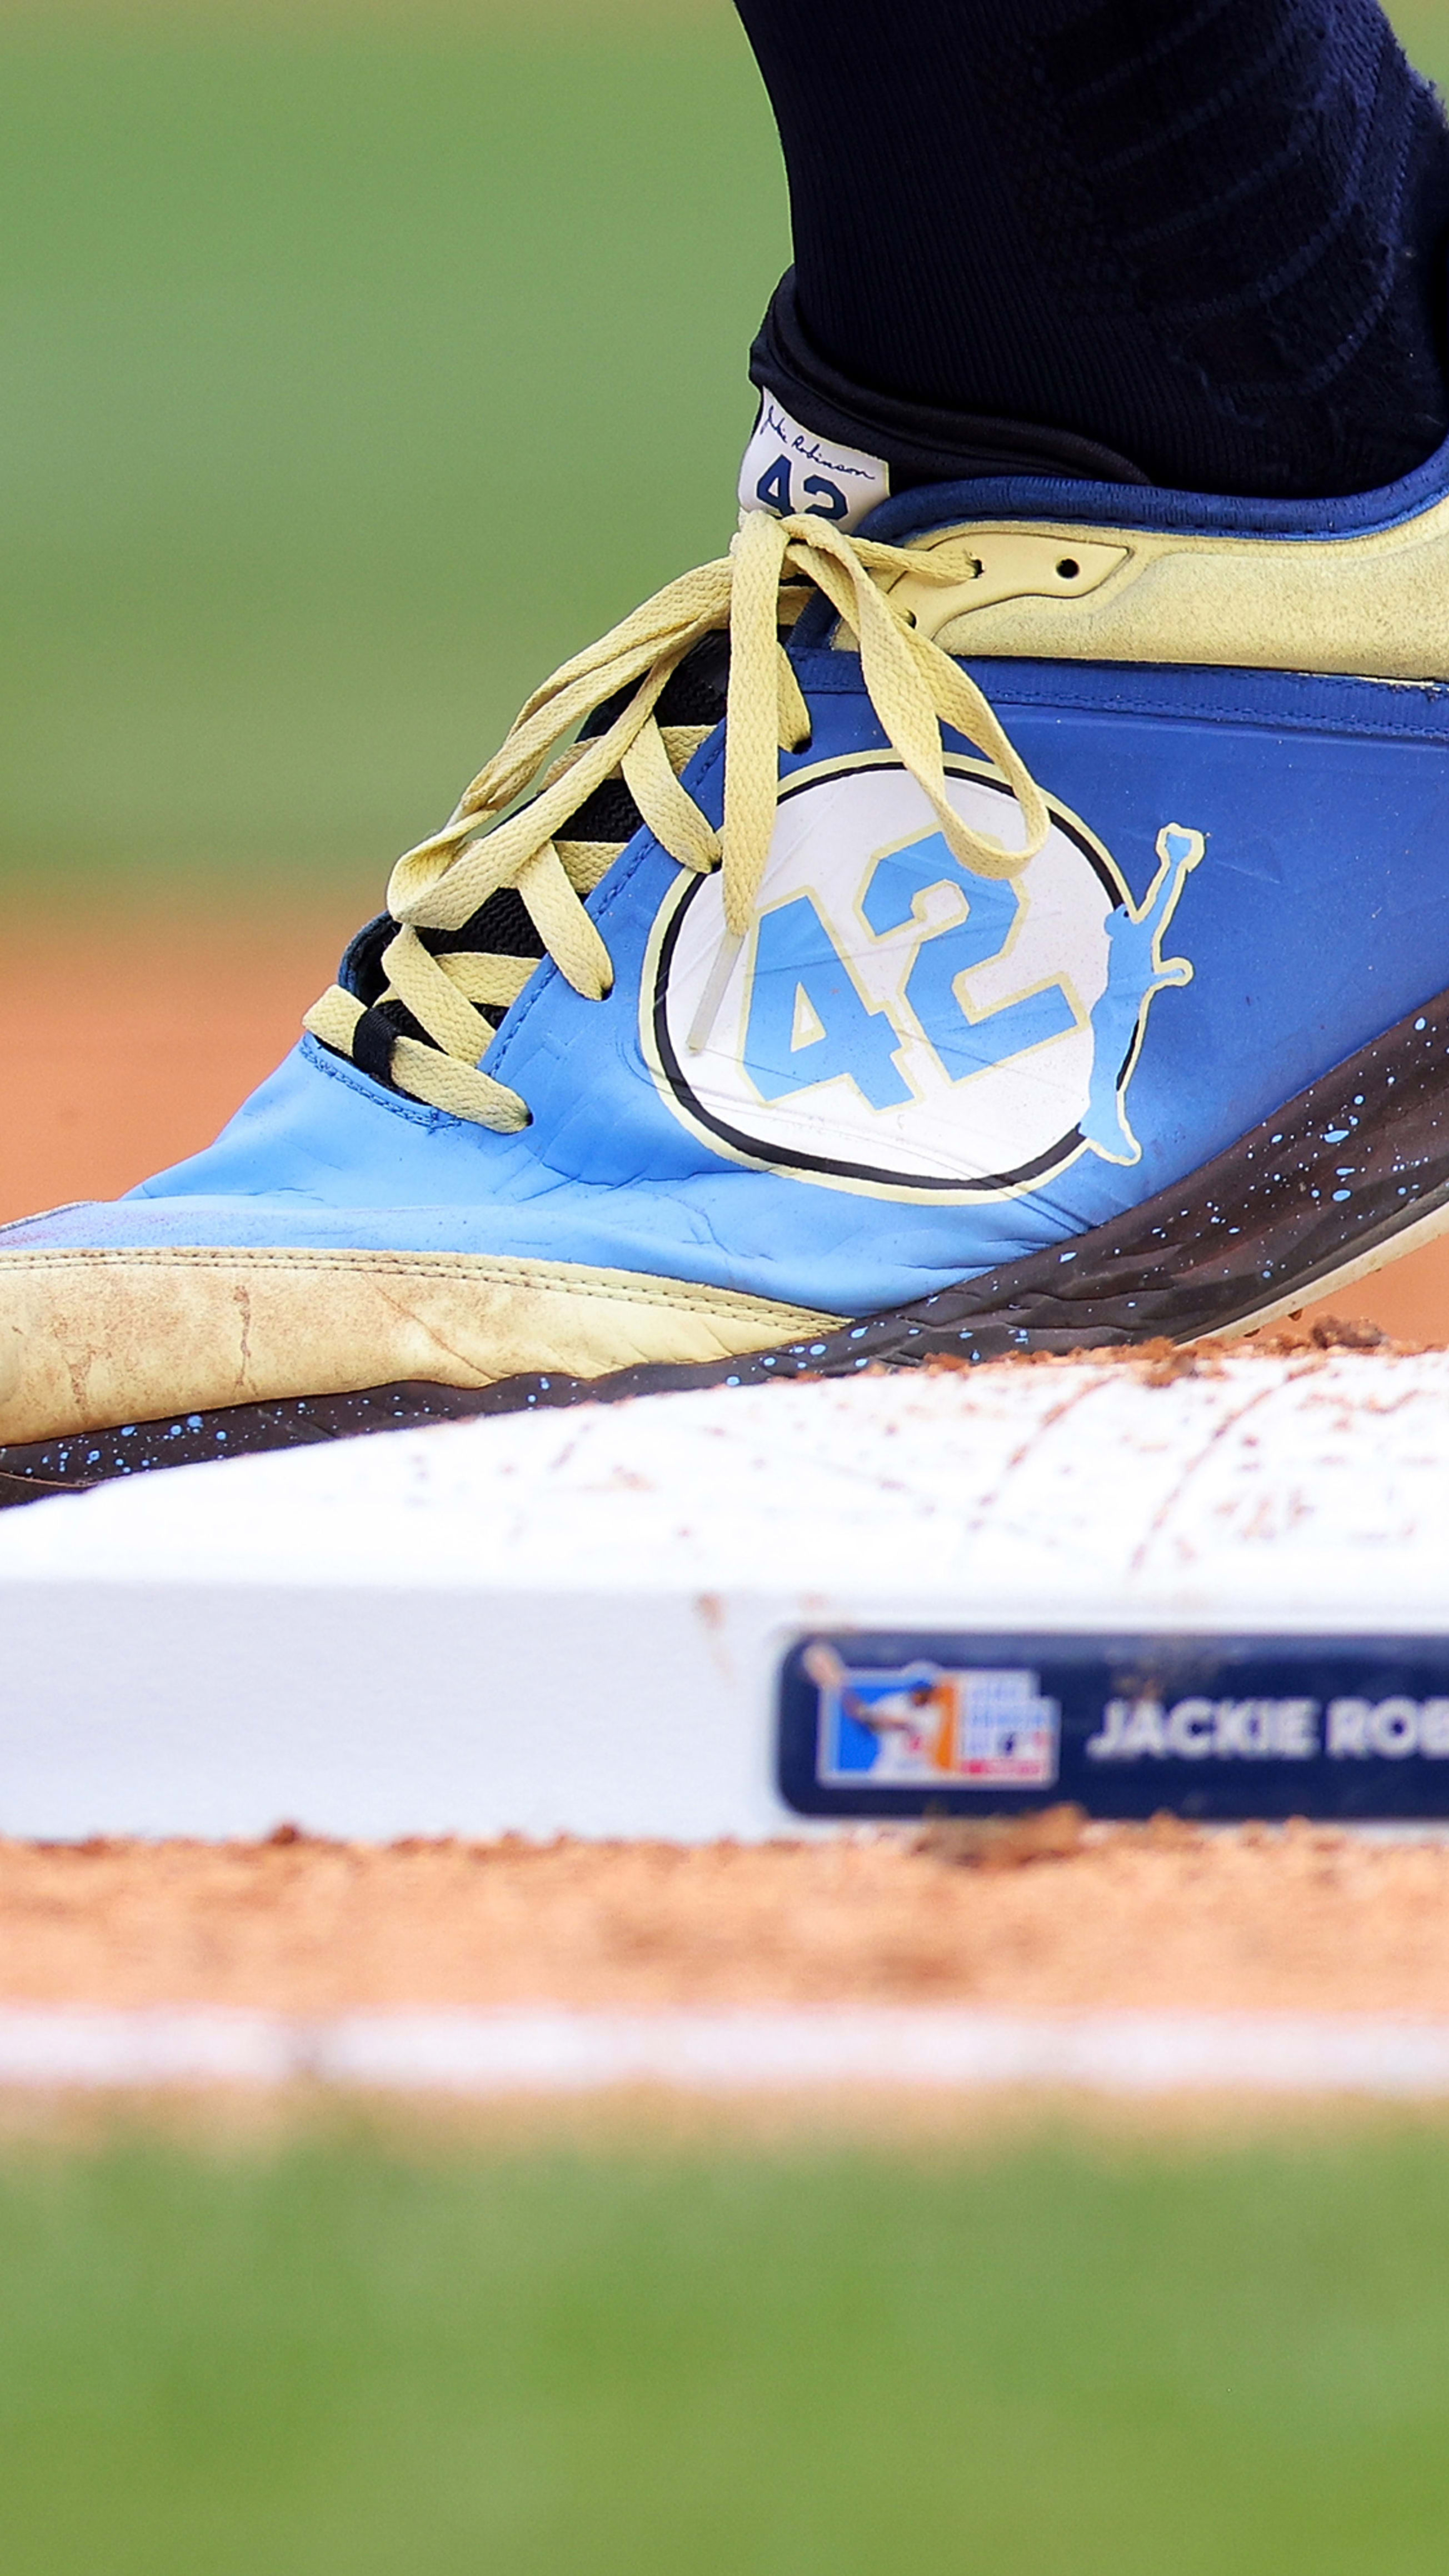 MLB Stories - MLB players' Jackie Robinson Day gear and cleats